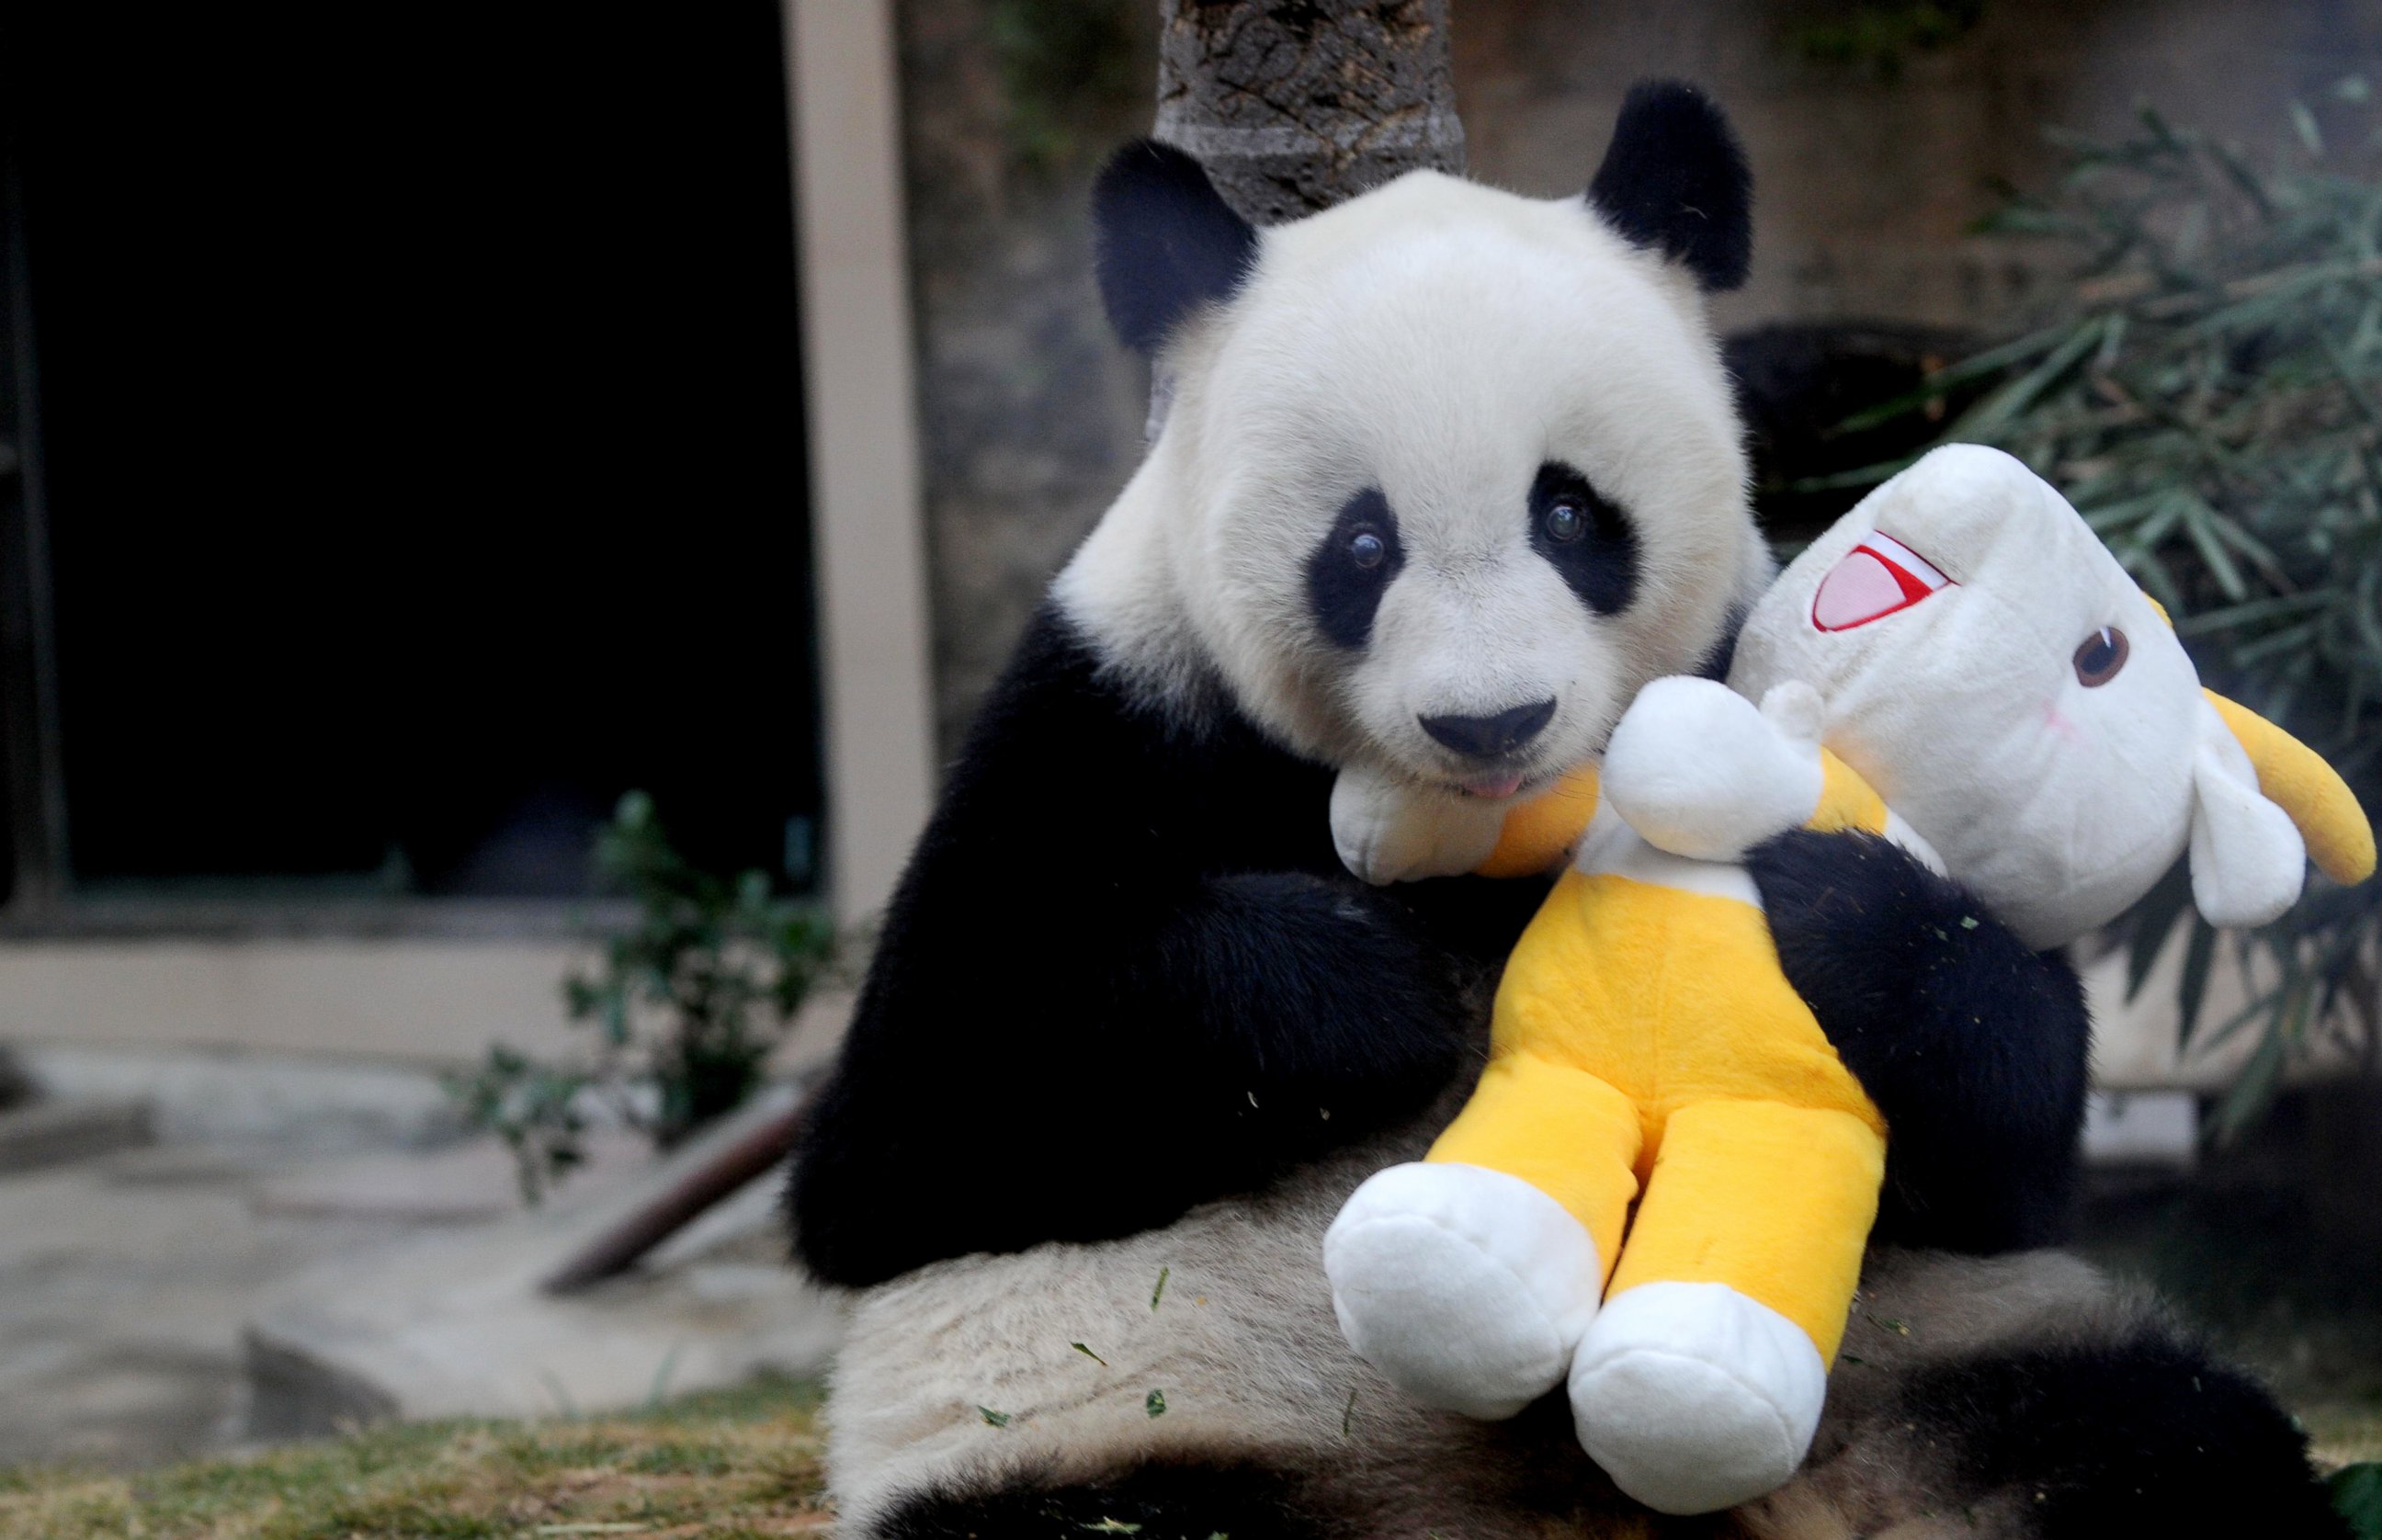 PHOTO: Giant panda "Pan Pan" holds a mascot of the 16th Asian Games, at a zoo in Fuzhou, in south China's Fujian province, on Nov. 12, 2010.